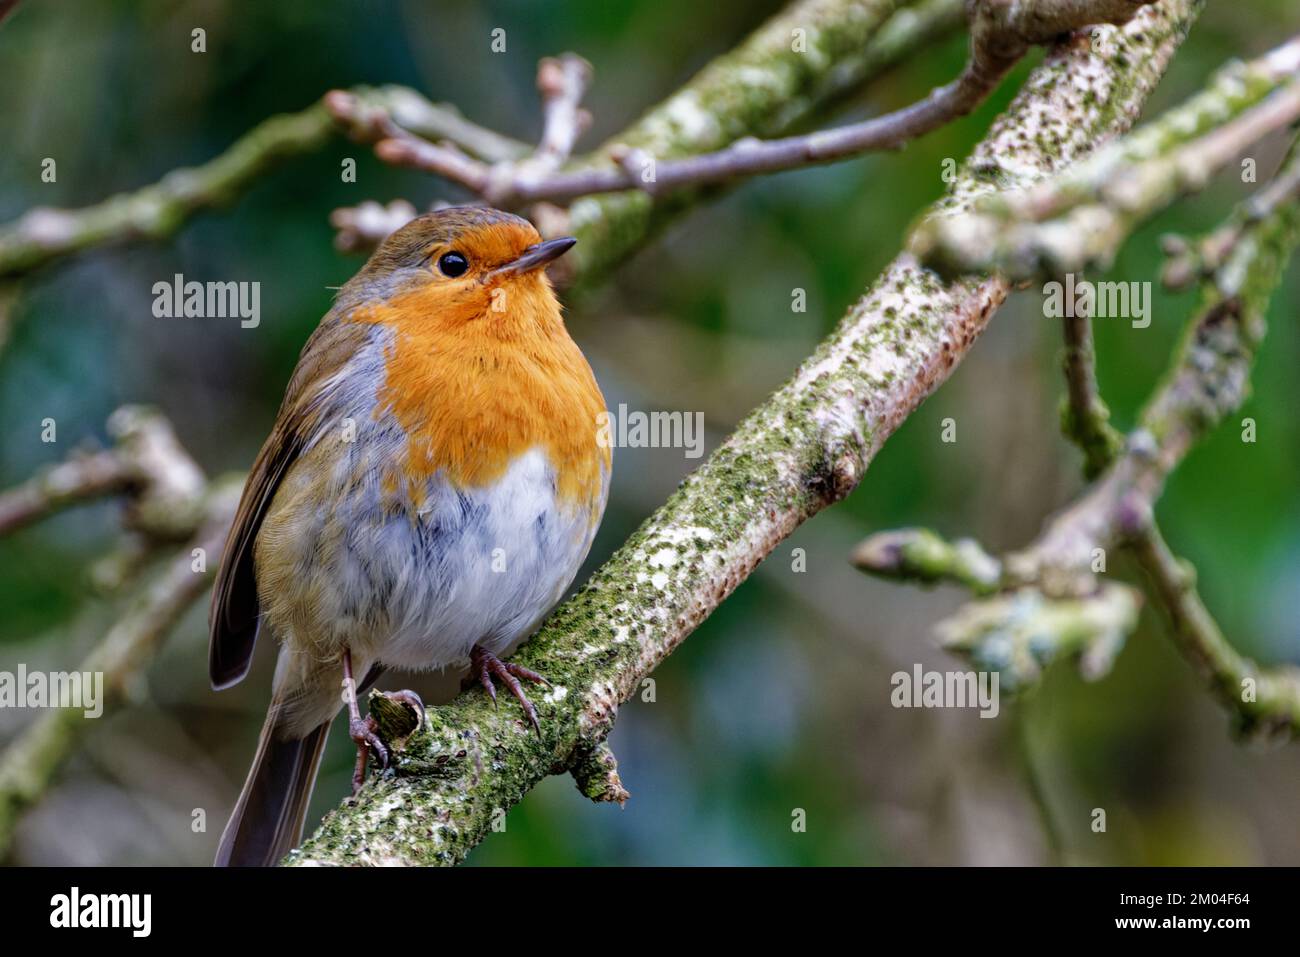 Robin Redbreast perched on twig at North Wales, United Kingdom Stock Photo